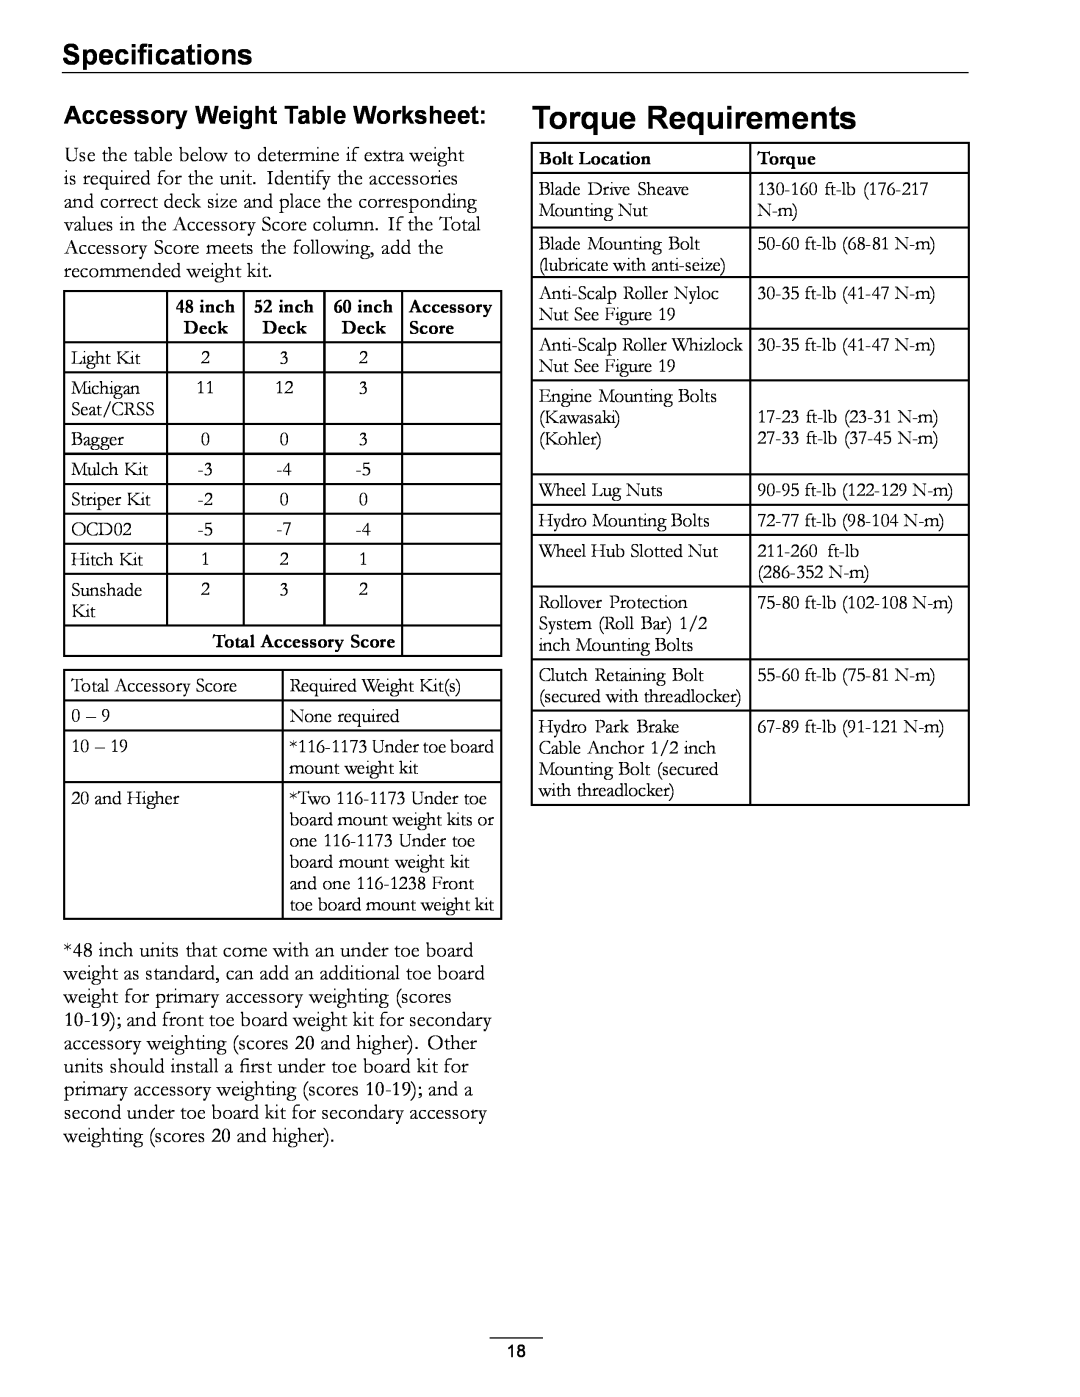 Exmark 000 & higher, 312 Torque Requirements, Accessory Weight Table Worksheet, Specifications, inch, Score, Bolt Location 